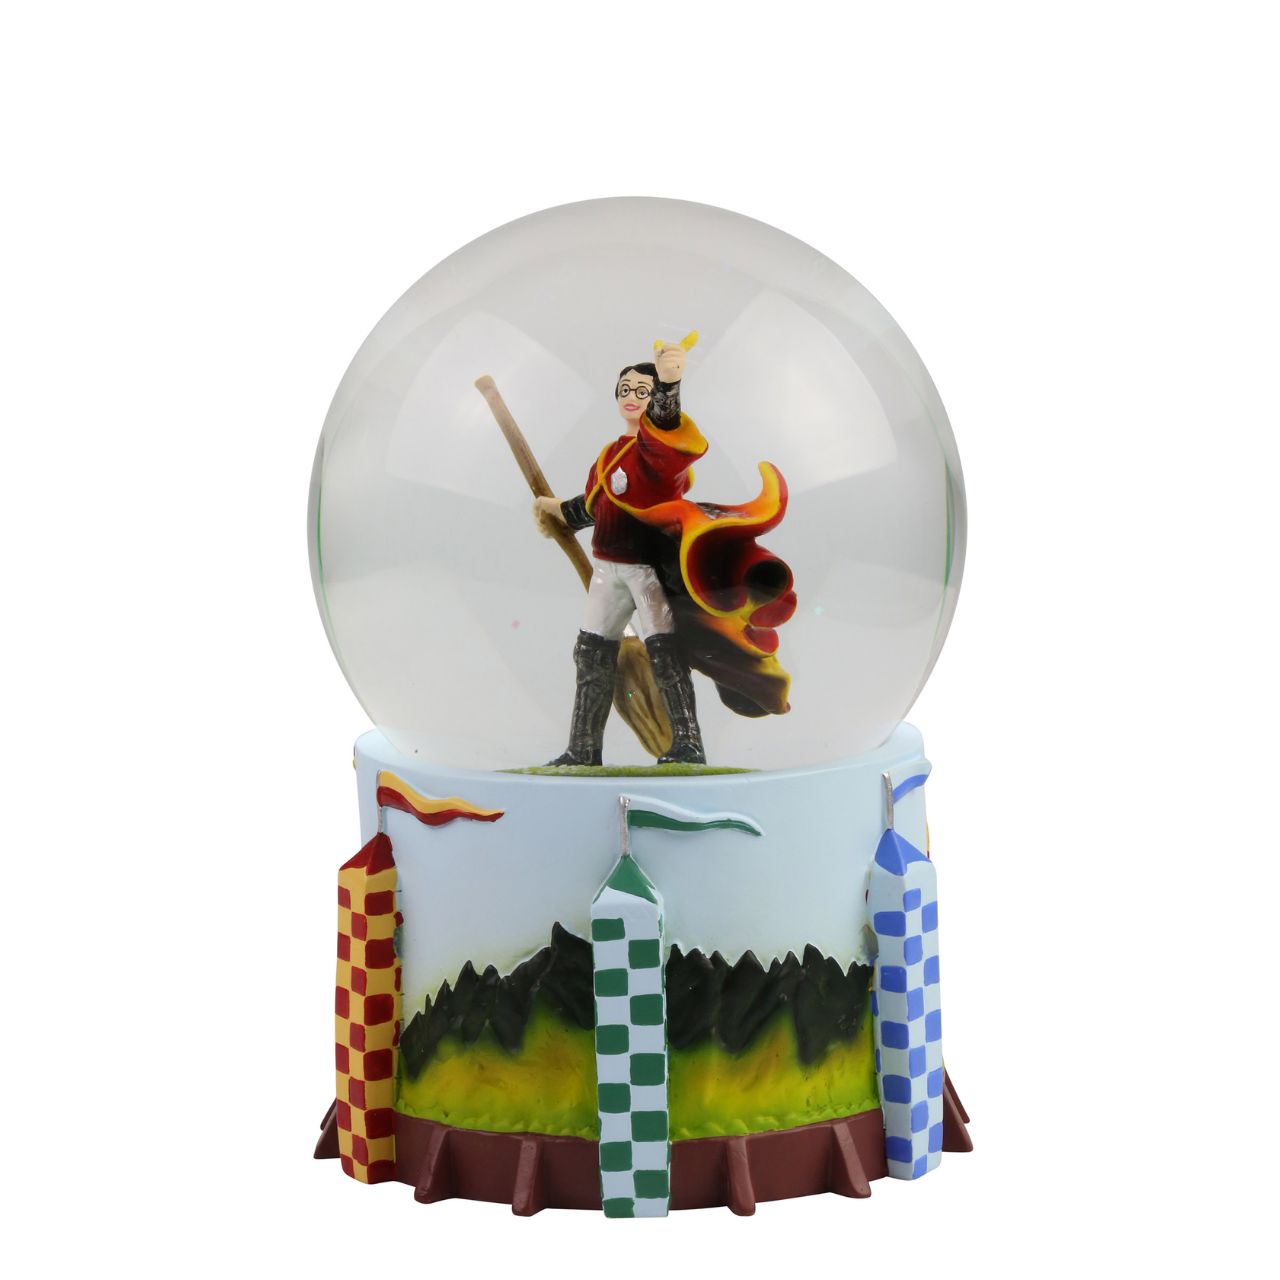 Harry Potter Quidditch Waterball  Celebrate Gryffindor's triumphant win with this Harry Potter Waterball. This is taken from the iconic scene where Harry Potter wins the Quidditch game in Harry Potter and the Philosopher's stone, by nearly swallowing the Golden Snitch and then holding it joyfully above his head.